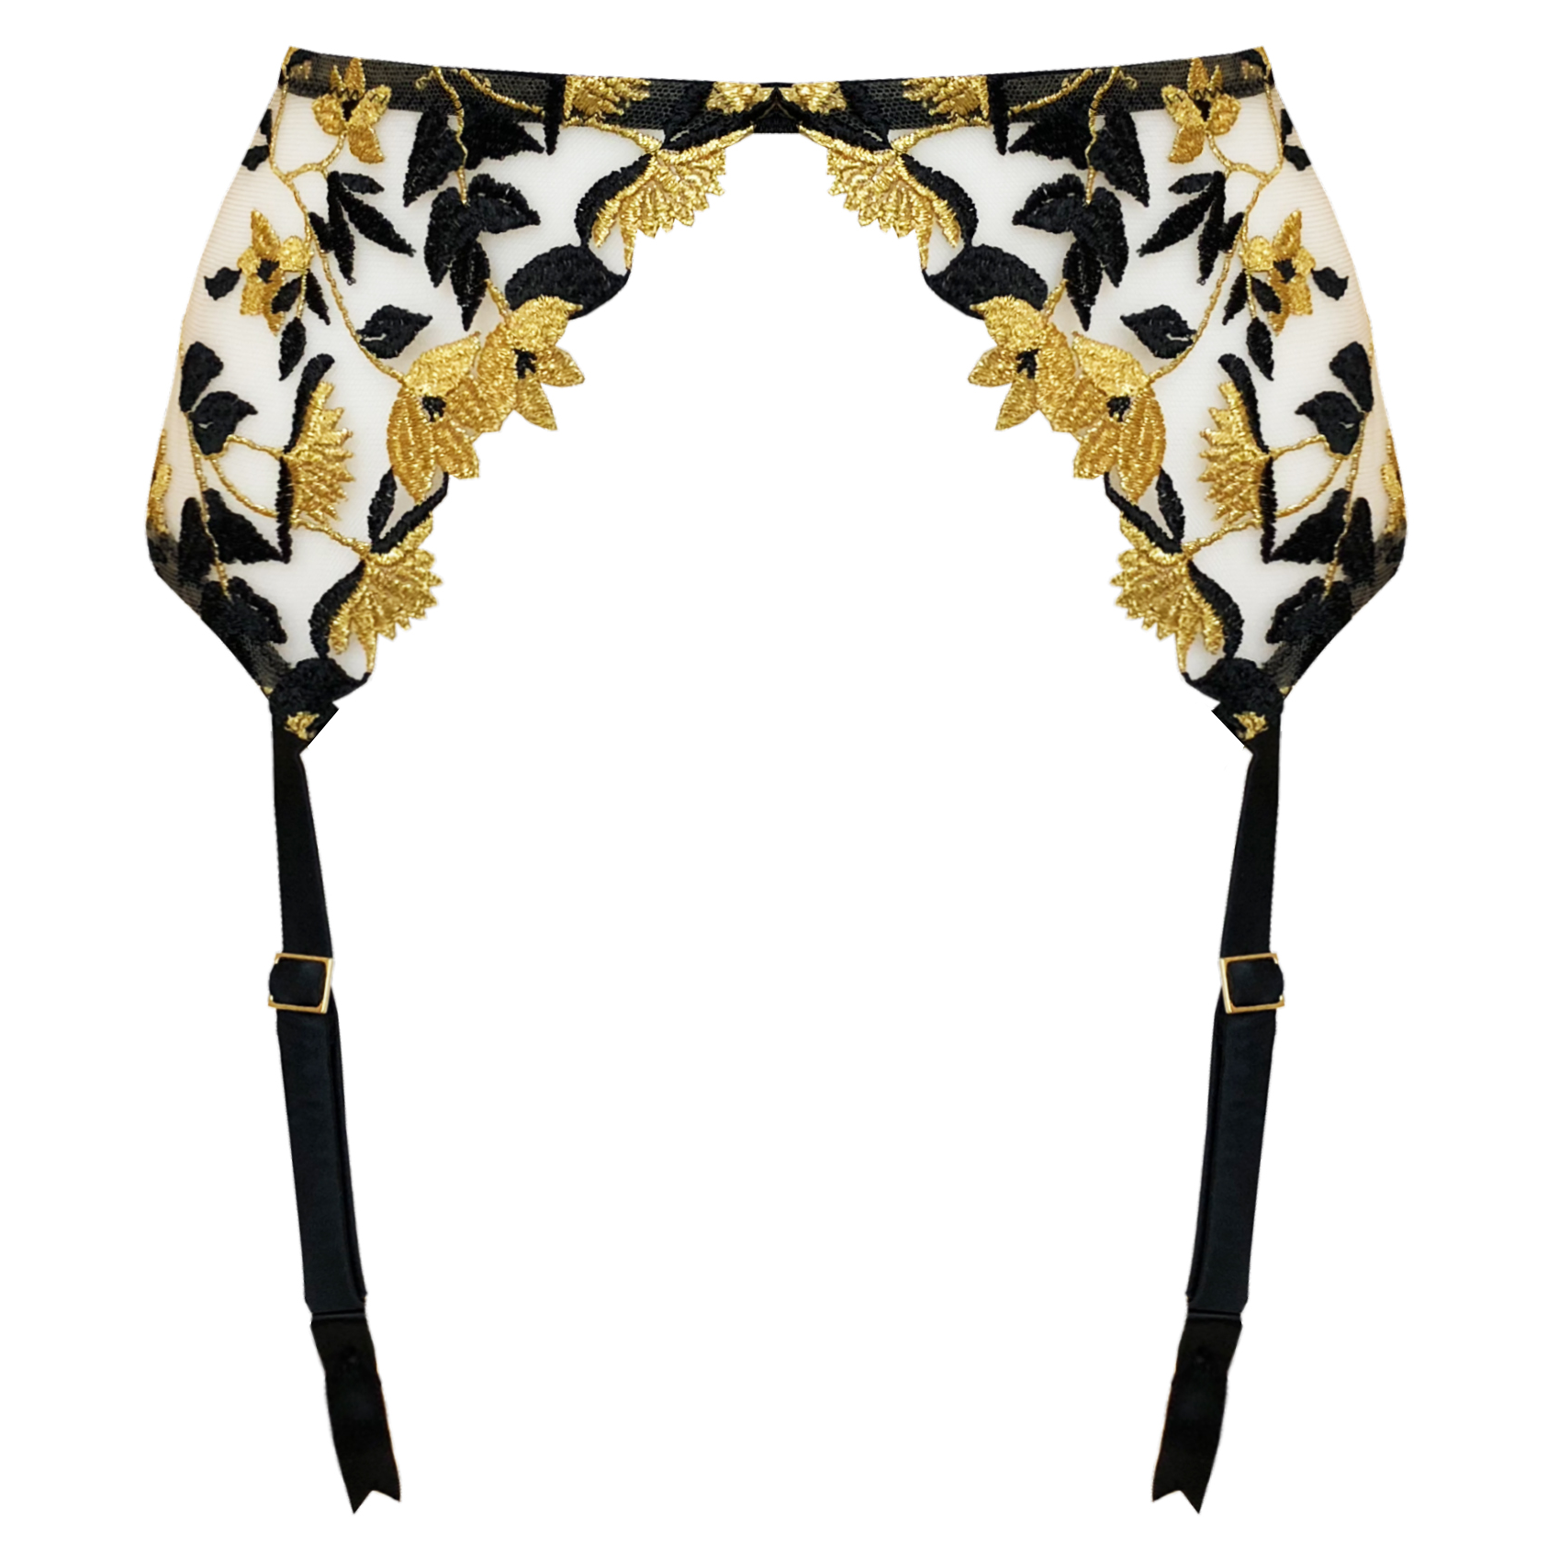 Studio Pia Soraya harness suspender with leg straps detached gold black leaf embroidery sheer tulle signature collection